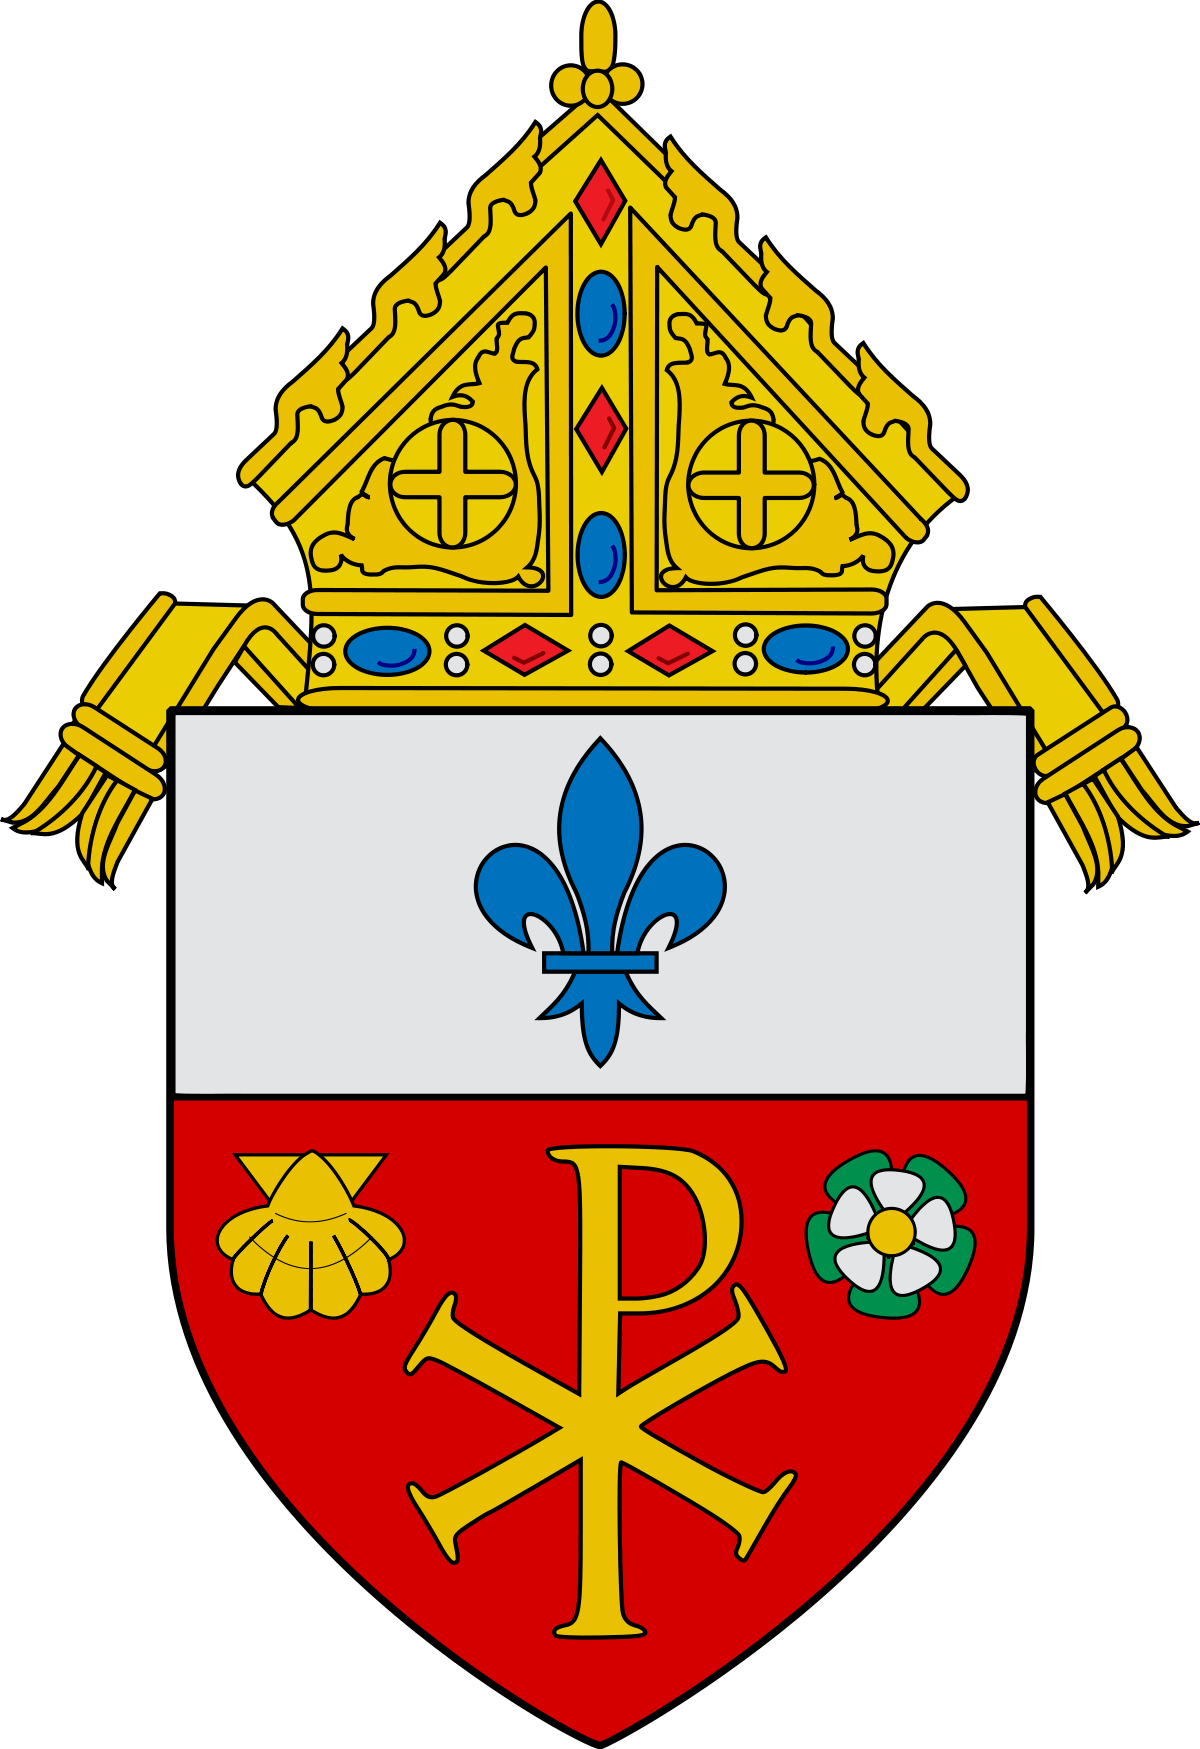 Roman Catholic Diocese Of Orlando - Diocese Of Orlando Coat Of Arms (1200x1749)